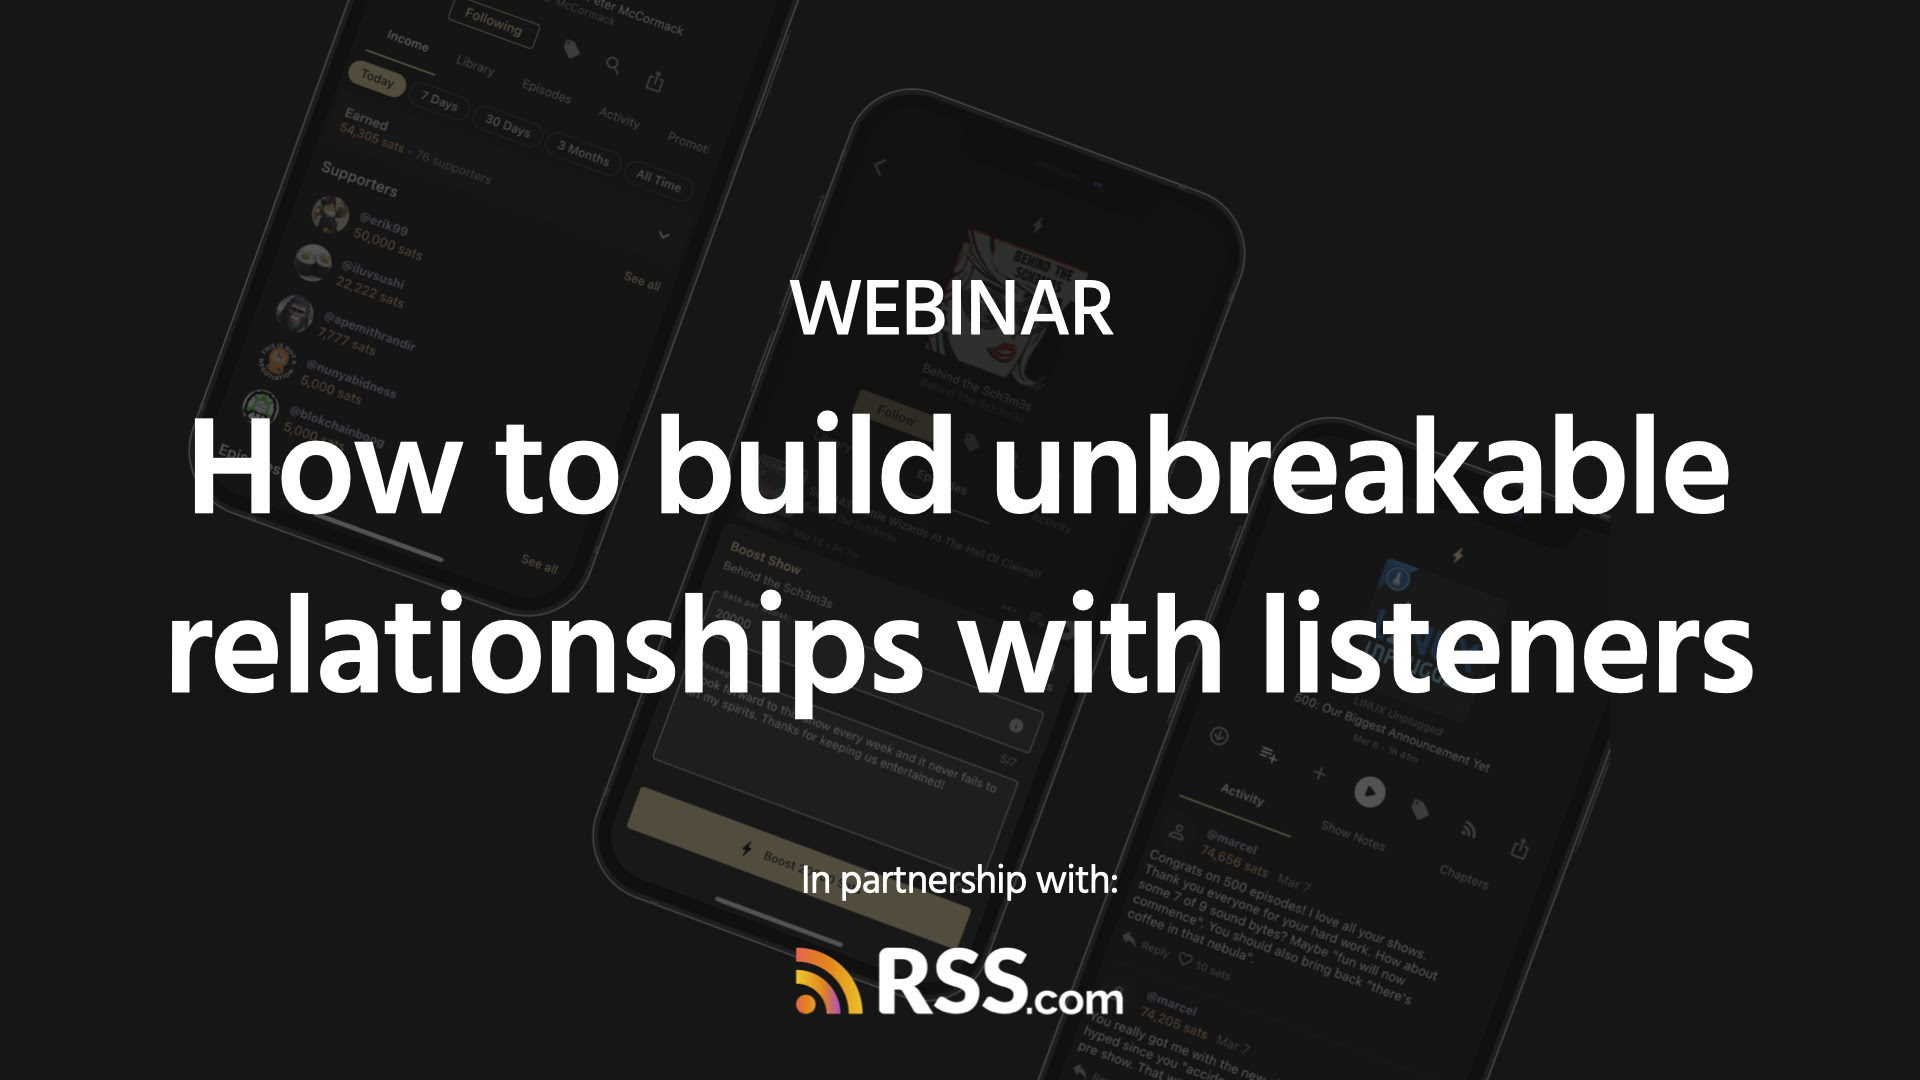 Value for Value: Building Unbreakable Relationships with Your Listeners